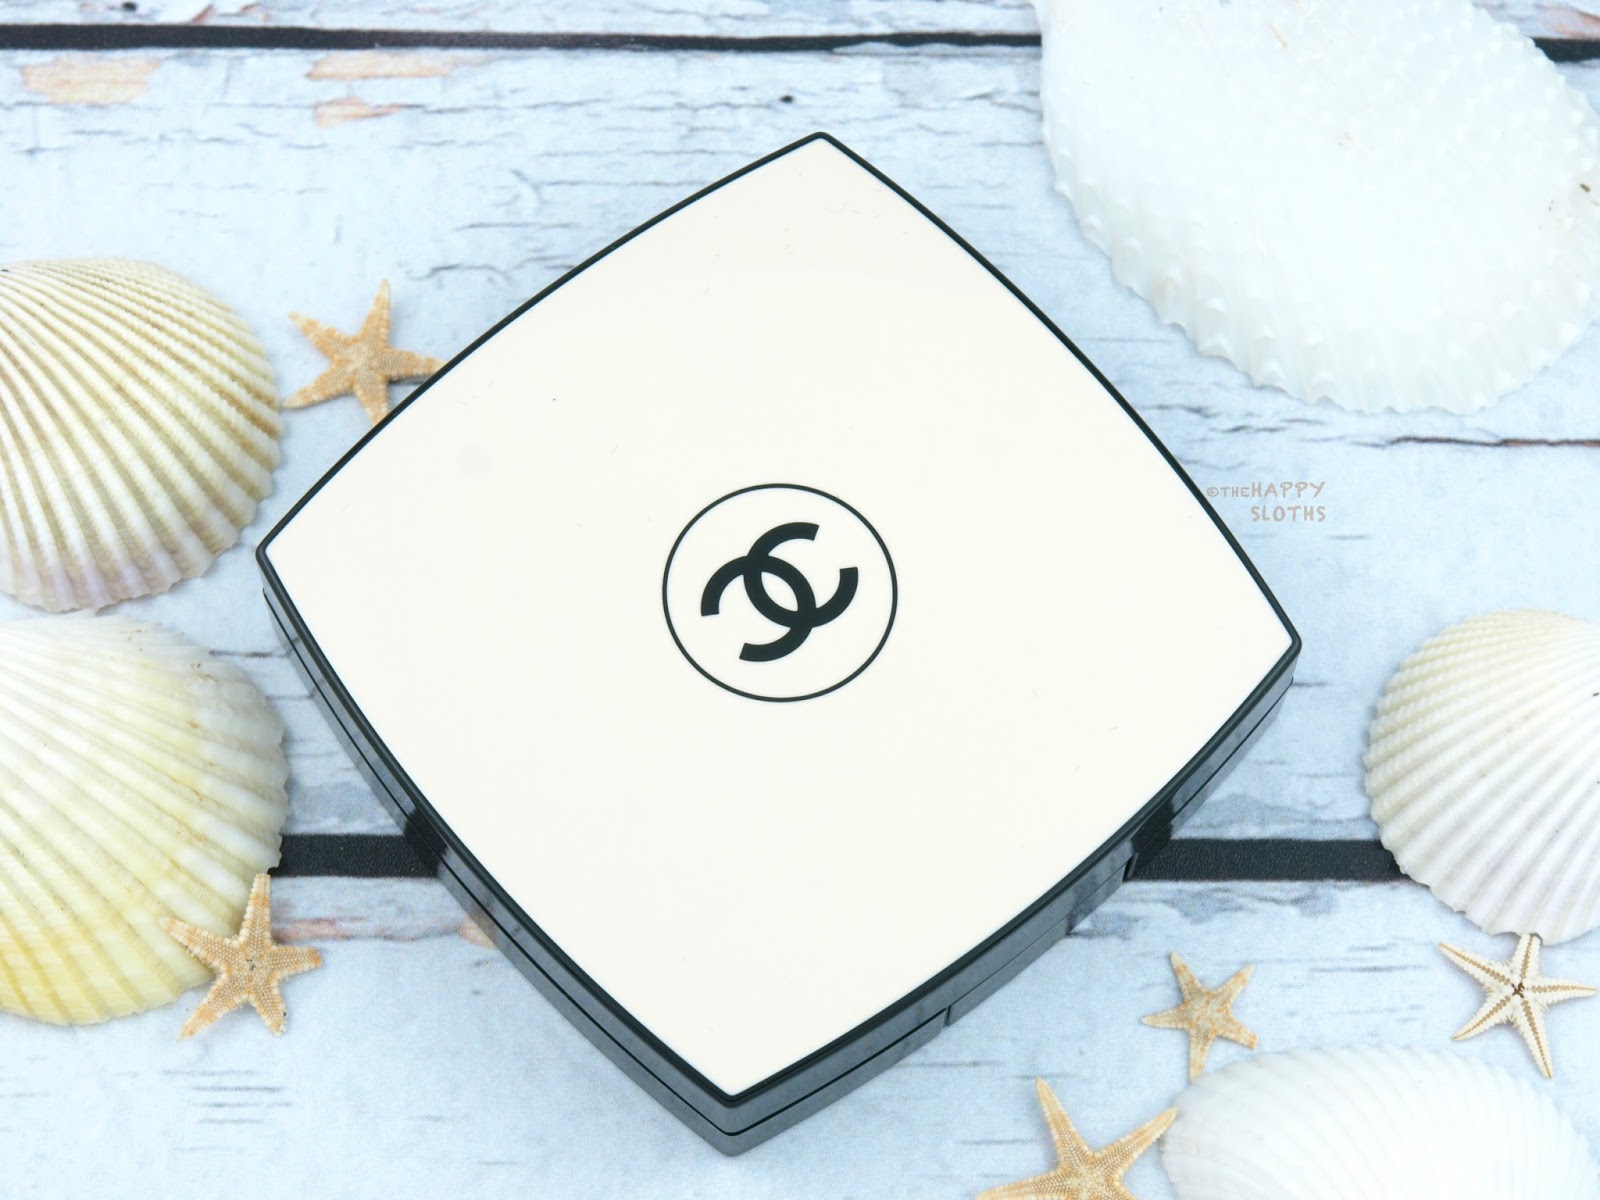 Chanel Summer 2017 Cruise Collection: Review and Swatches  The Happy Sloths:  Beauty, Makeup, and Skincare Blog with Reviews and Swatches